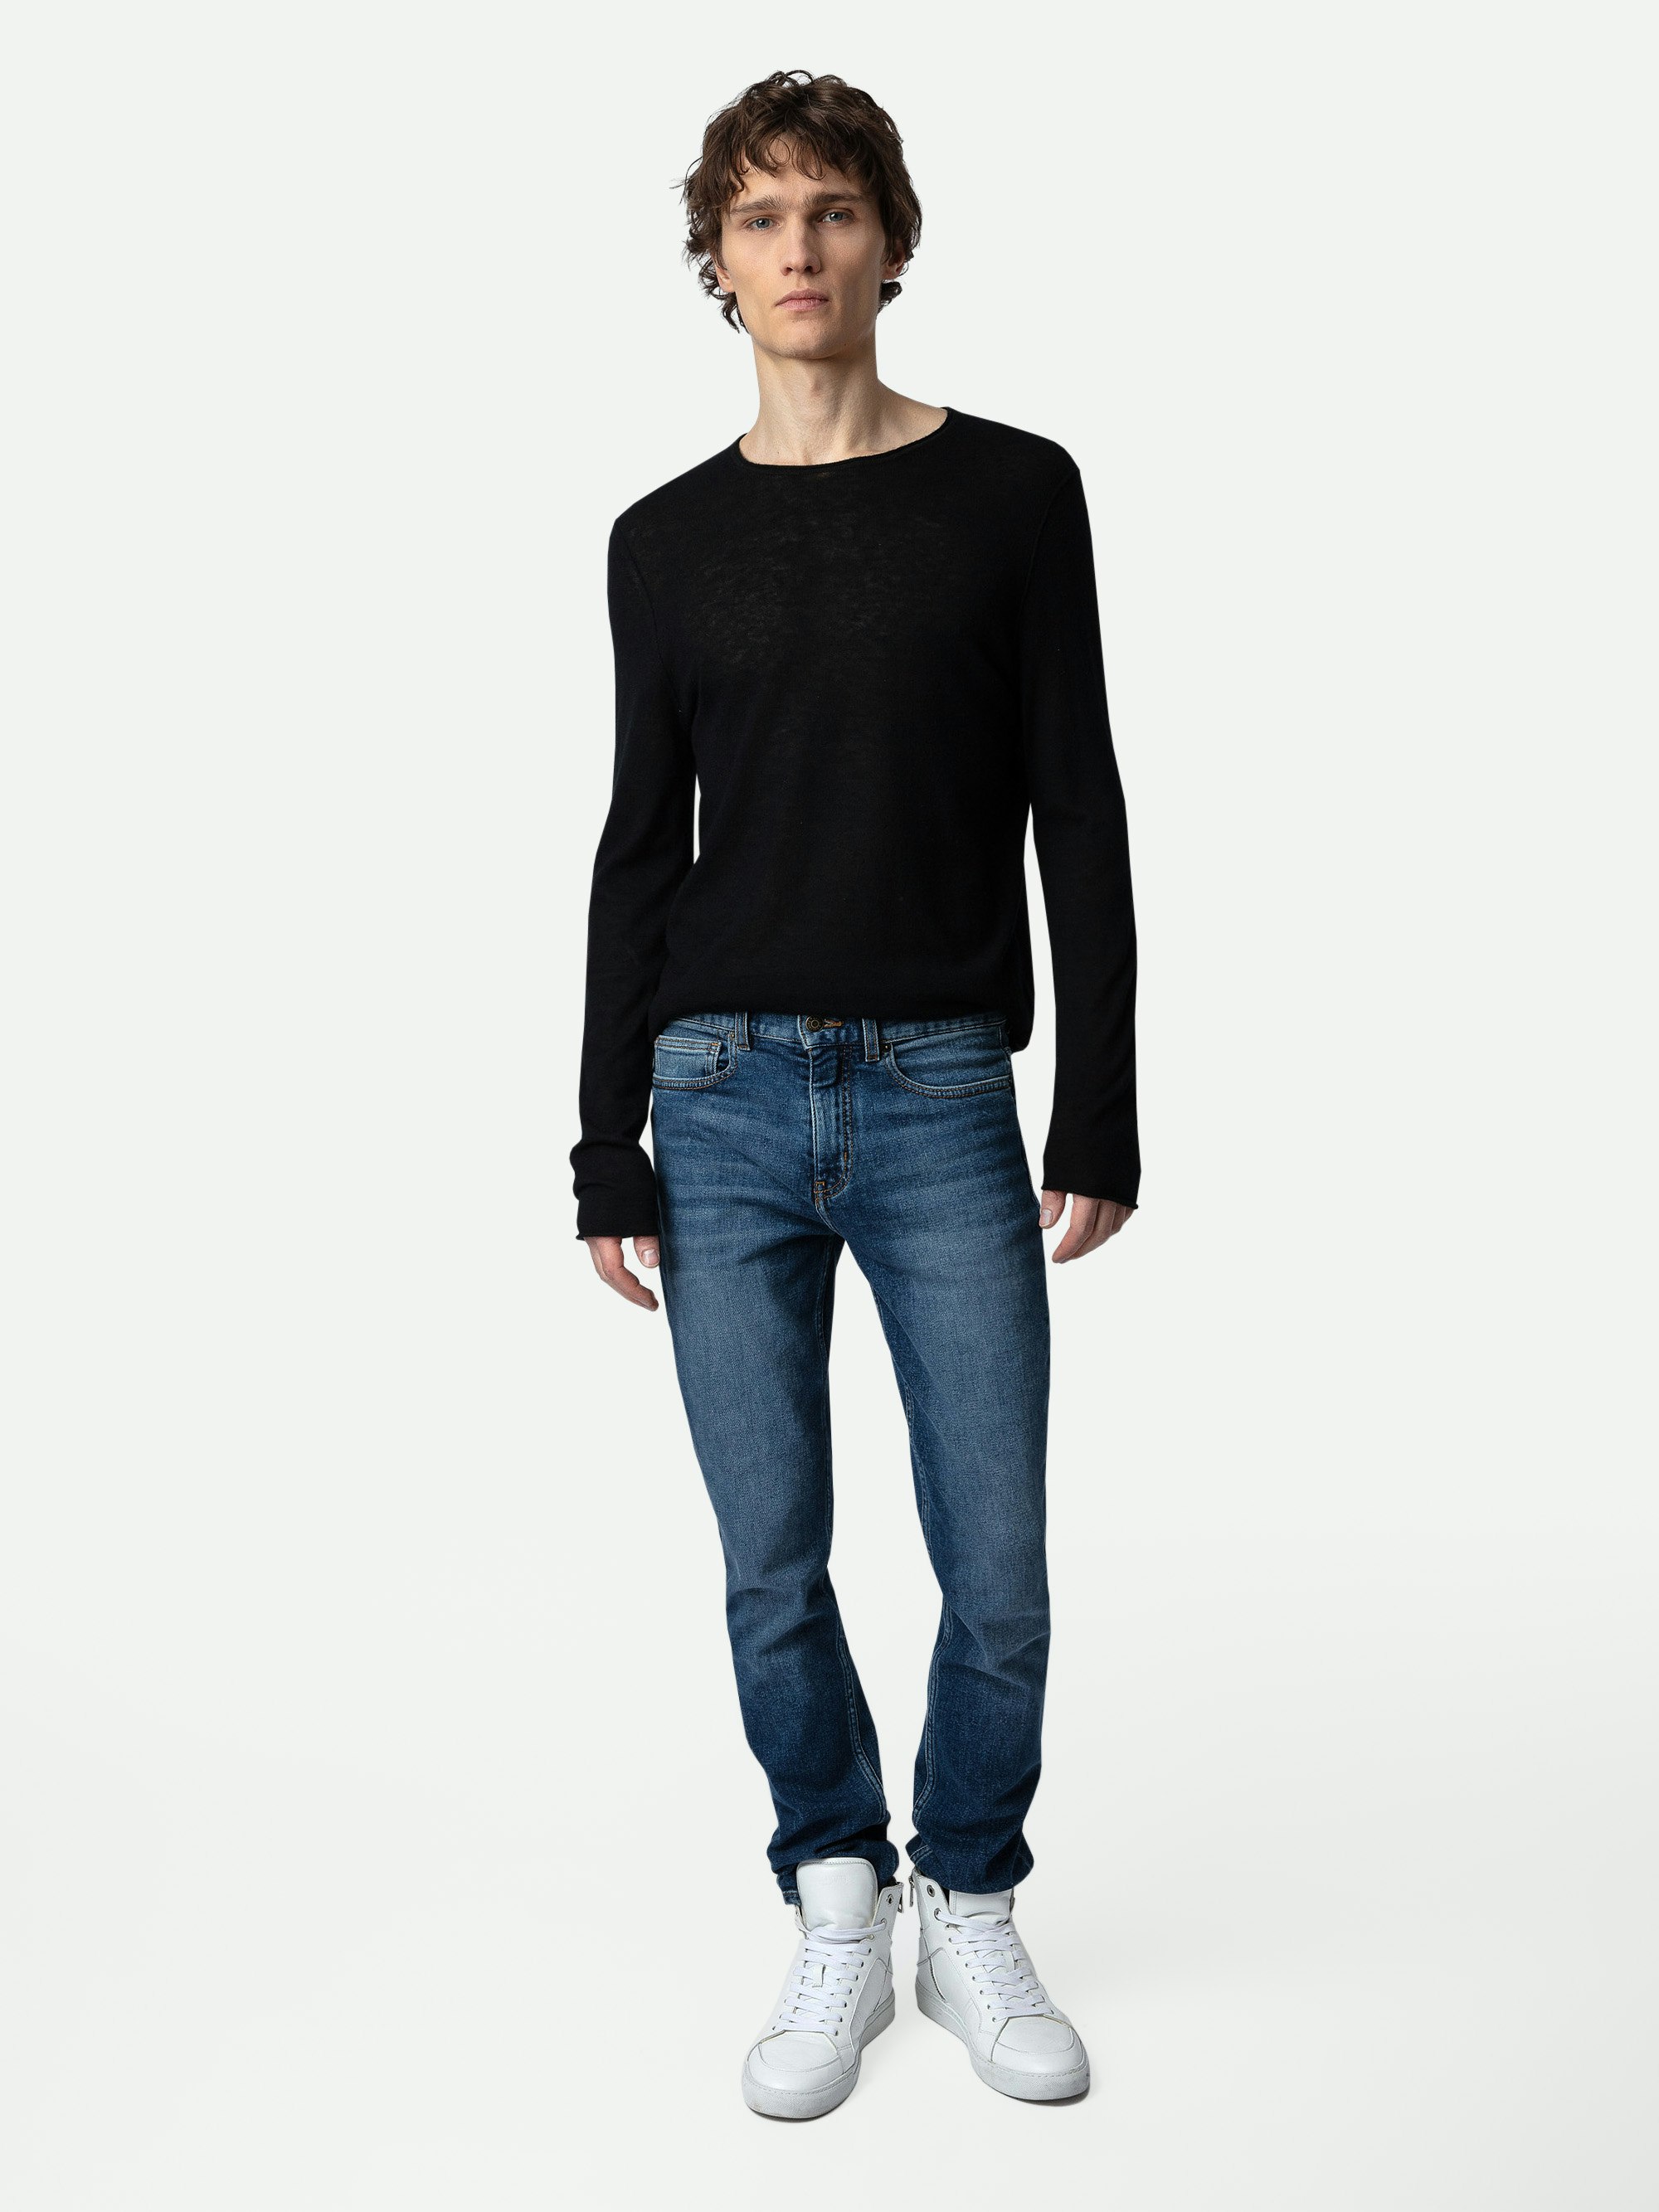 Teiss Cachemire Sweater - Men’s black feather cashmere sweater.